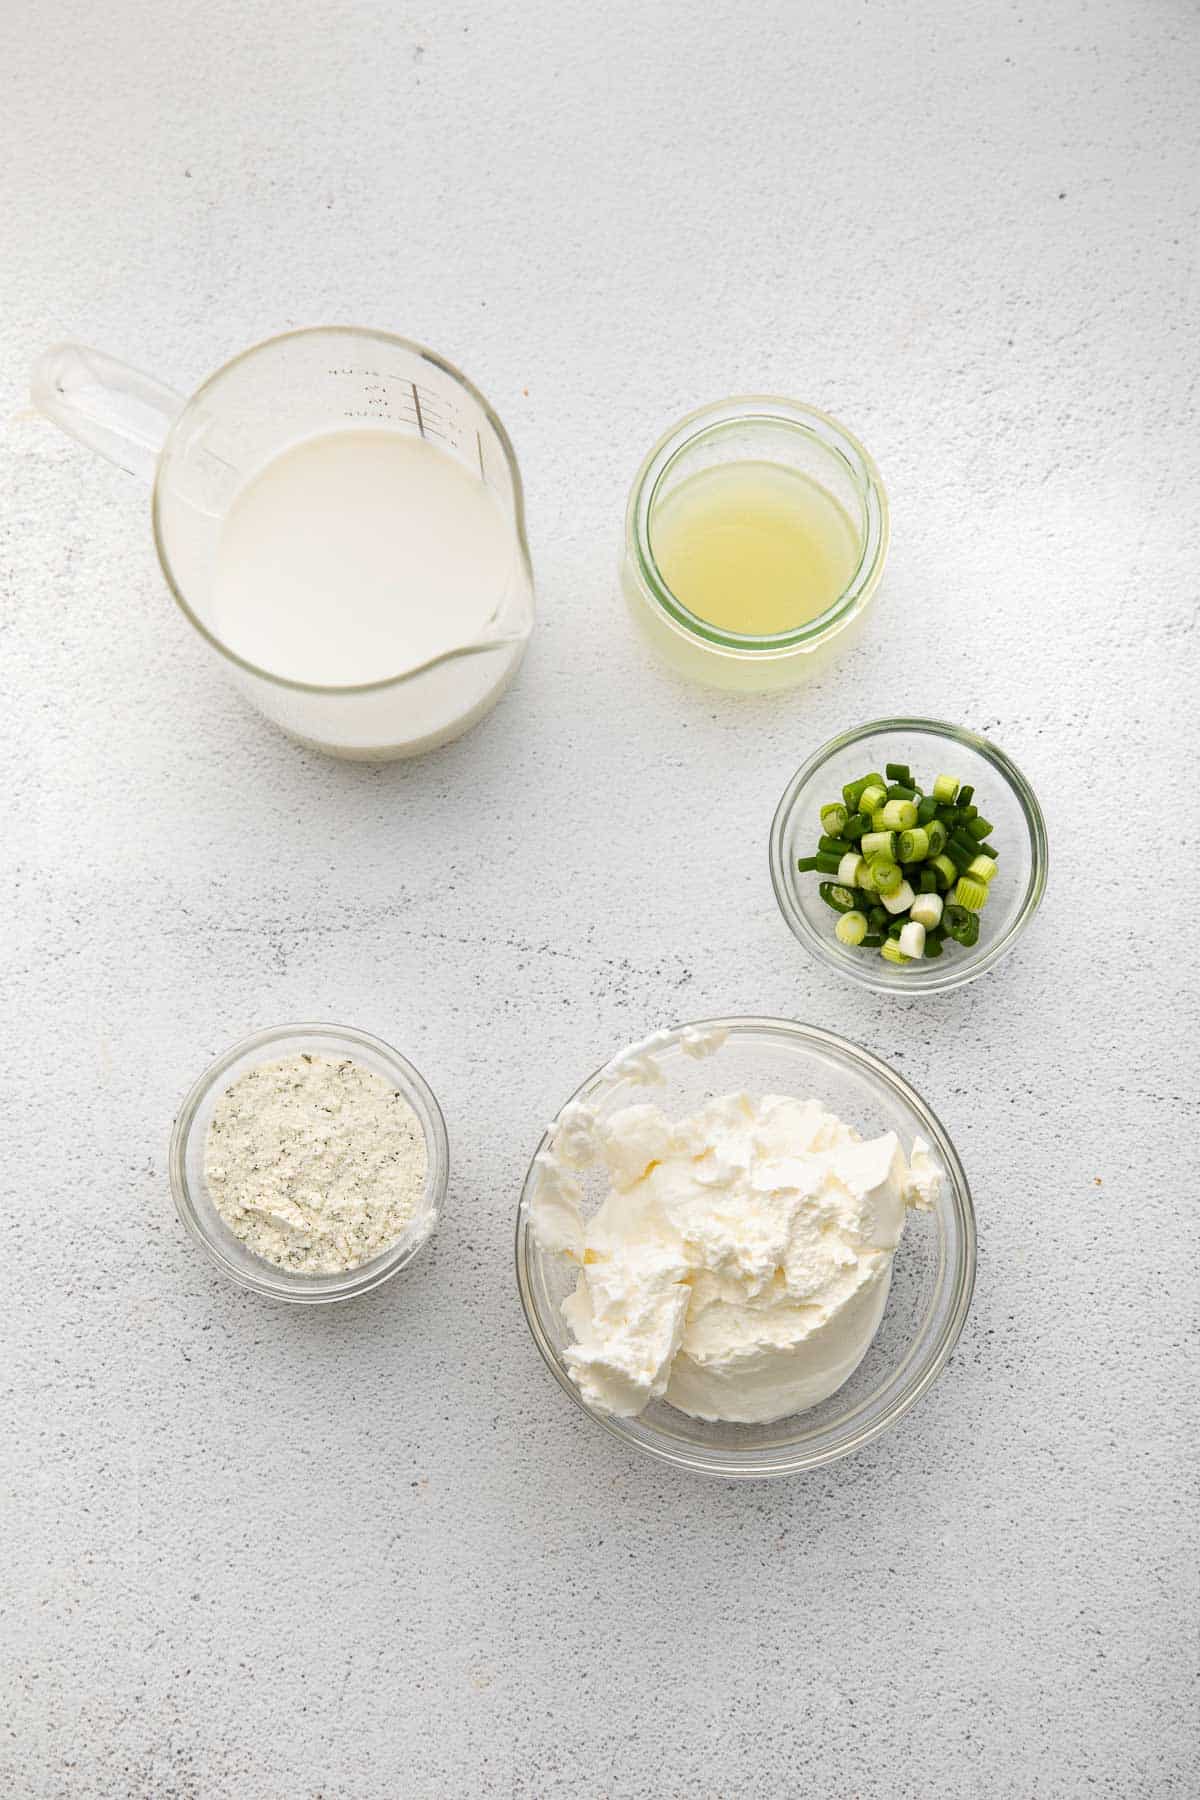 several bowls with ingredients for ranch dressing - sour cream, milk, ranch seasoning, lime juice and green onion.